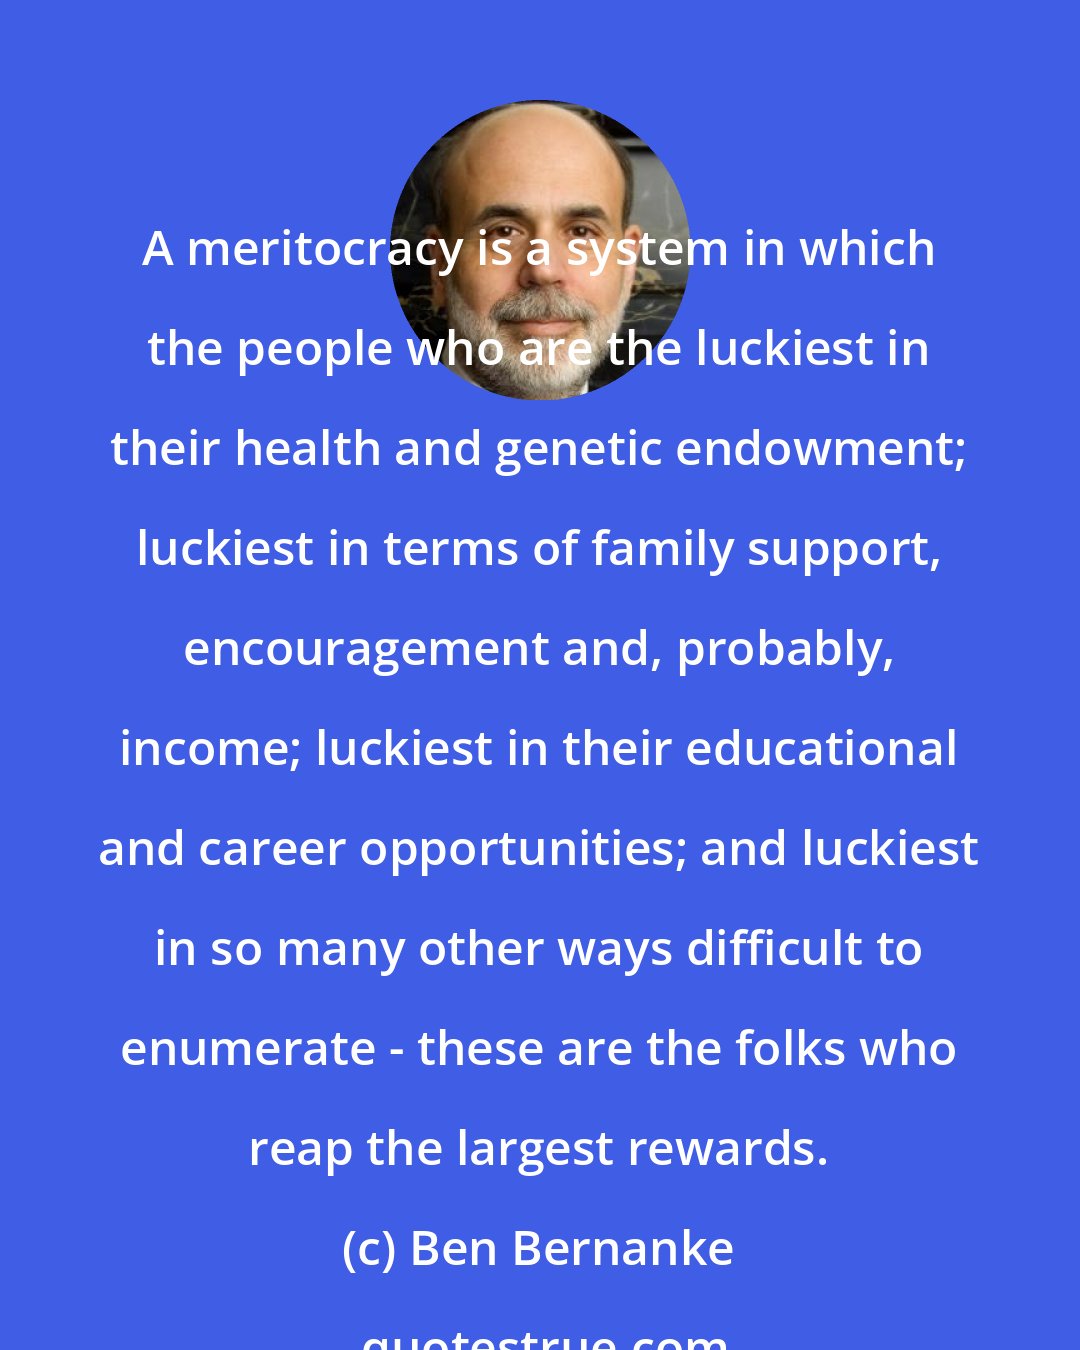 Ben Bernanke: A meritocracy is a system in which the people who are the luckiest in their health and genetic endowment; luckiest in terms of family support, encouragement and, probably, income; luckiest in their educational and career opportunities; and luckiest in so many other ways difficult to enumerate - these are the folks who reap the largest rewards.